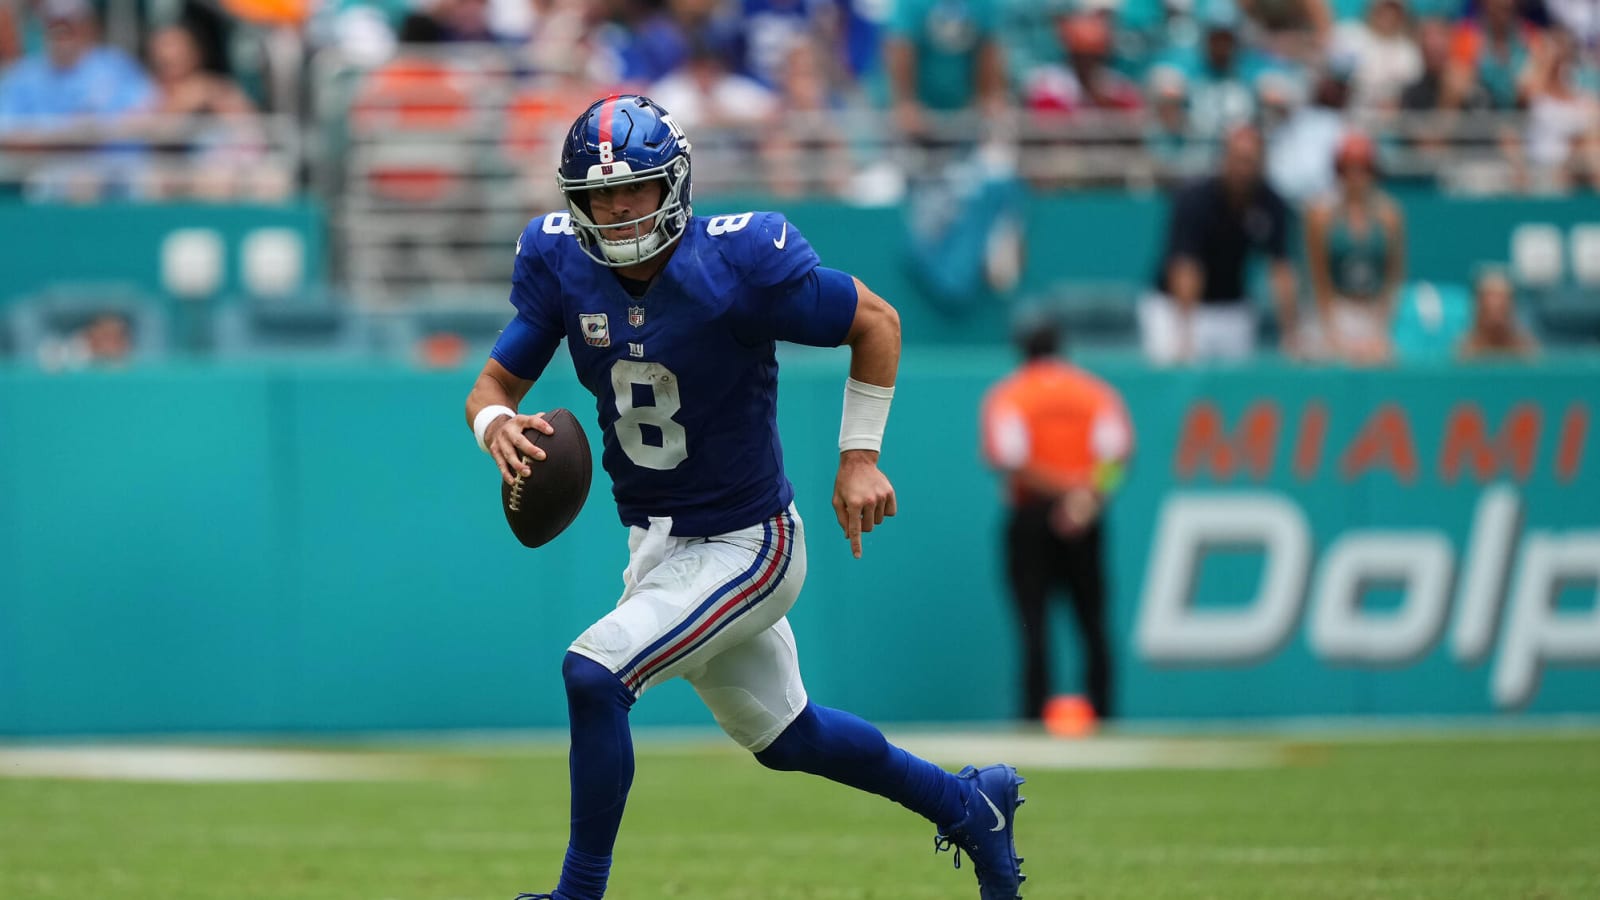 Giants starting QB role is anything but set in stone per report